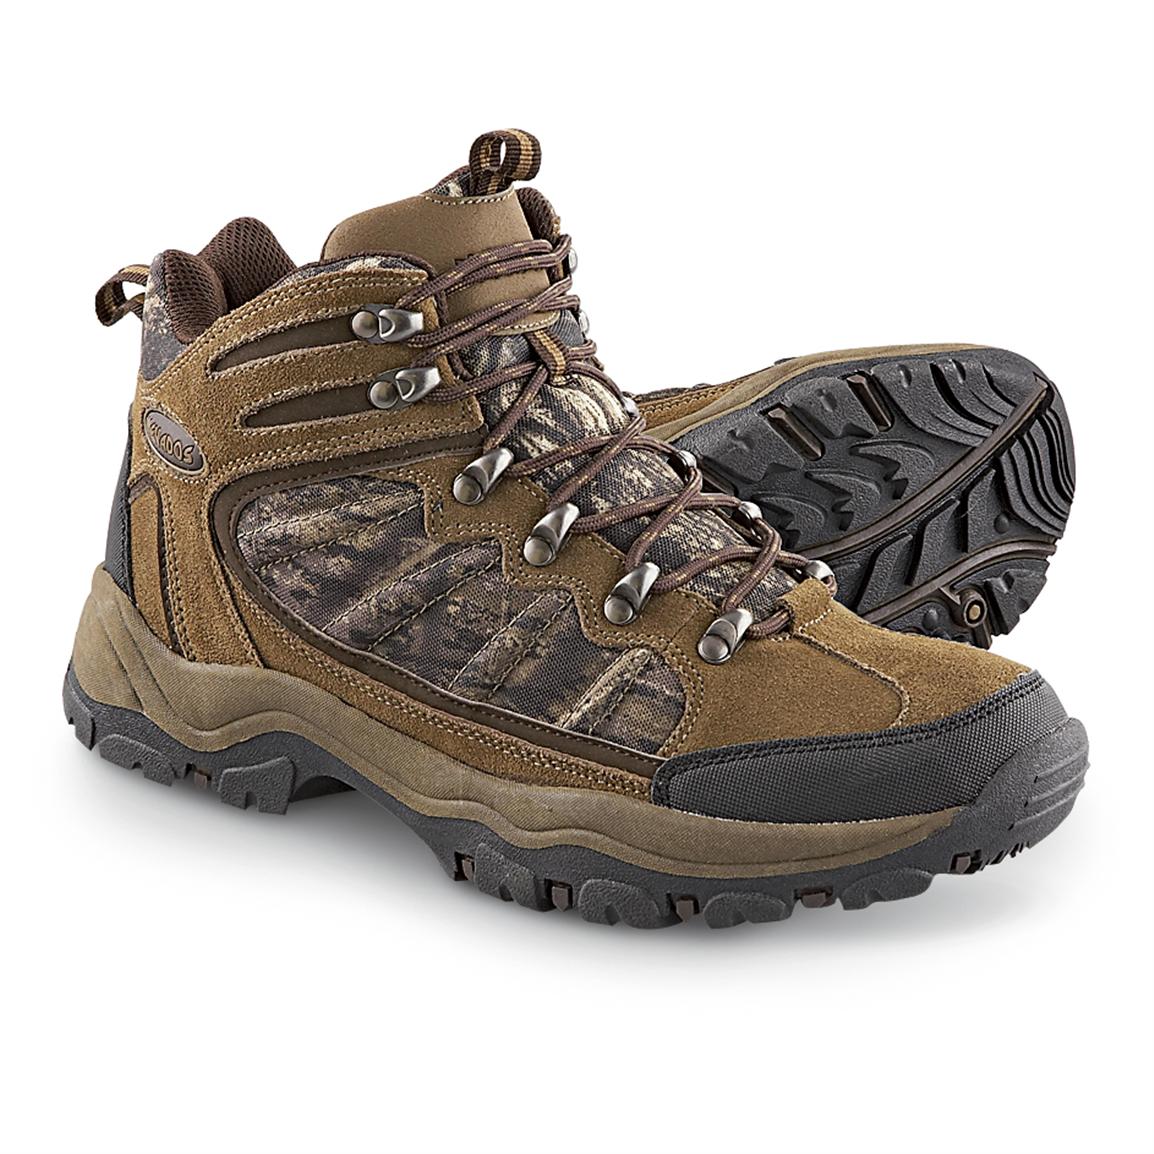 Men's Nevados® 6" Waterproof Camo Hikers - 183690, Hiking Boots & Shoes